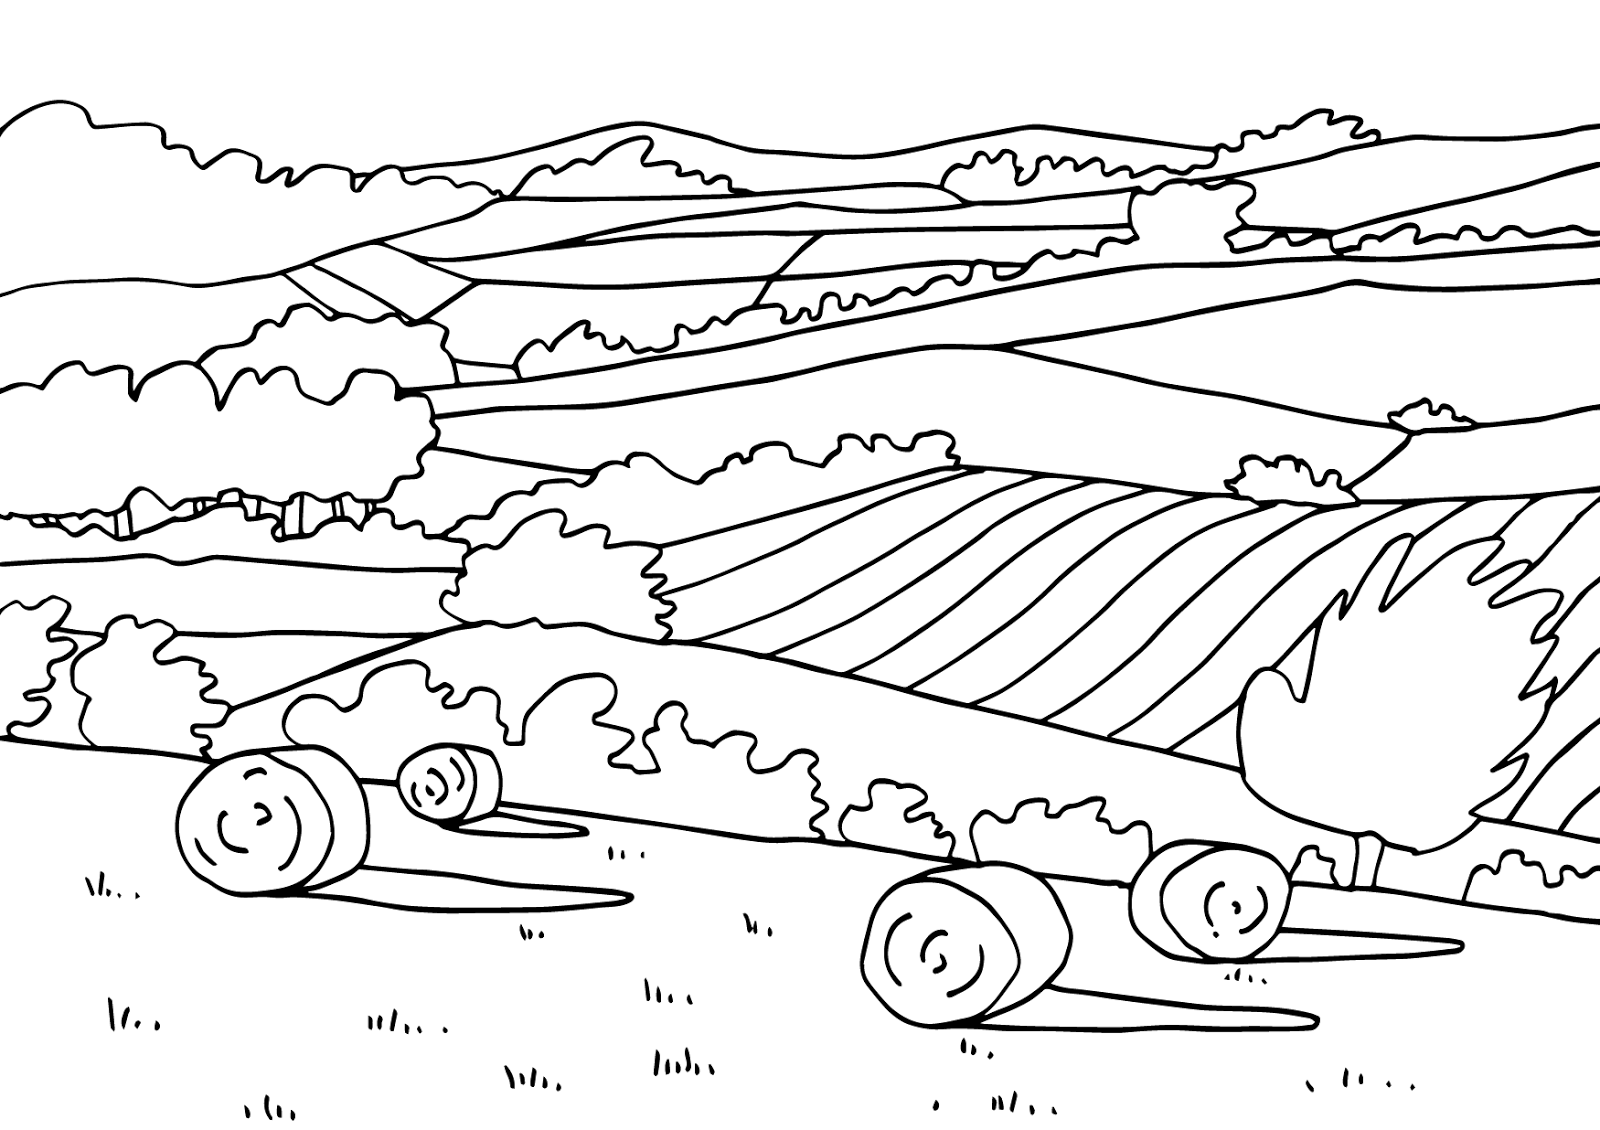 coloring-pages-countryside-nature-page-2-printable-coloring-pages